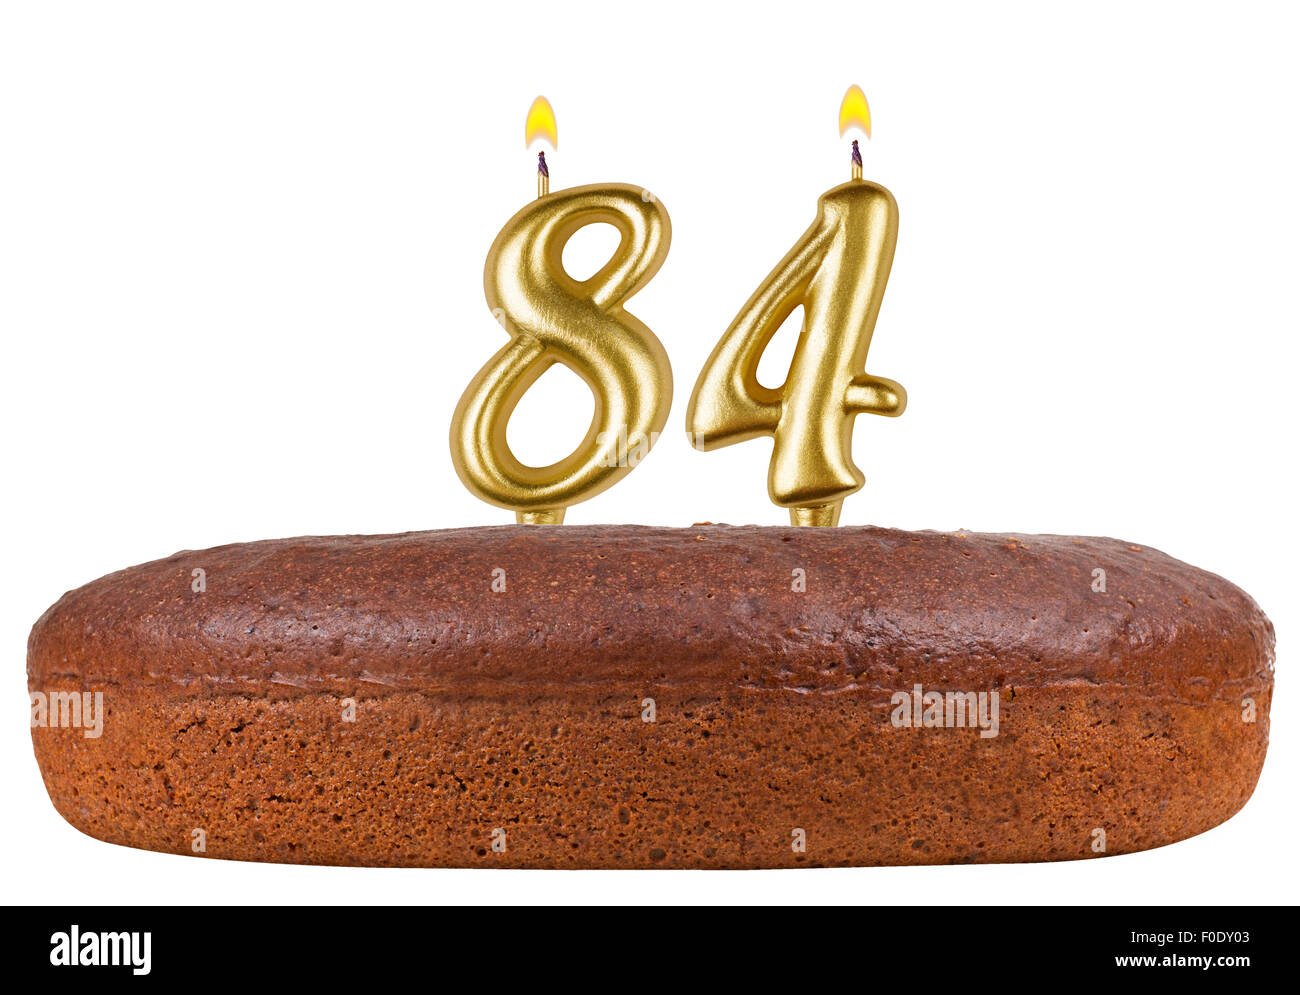 birthday cake candles number 84 isolated Stock Photo